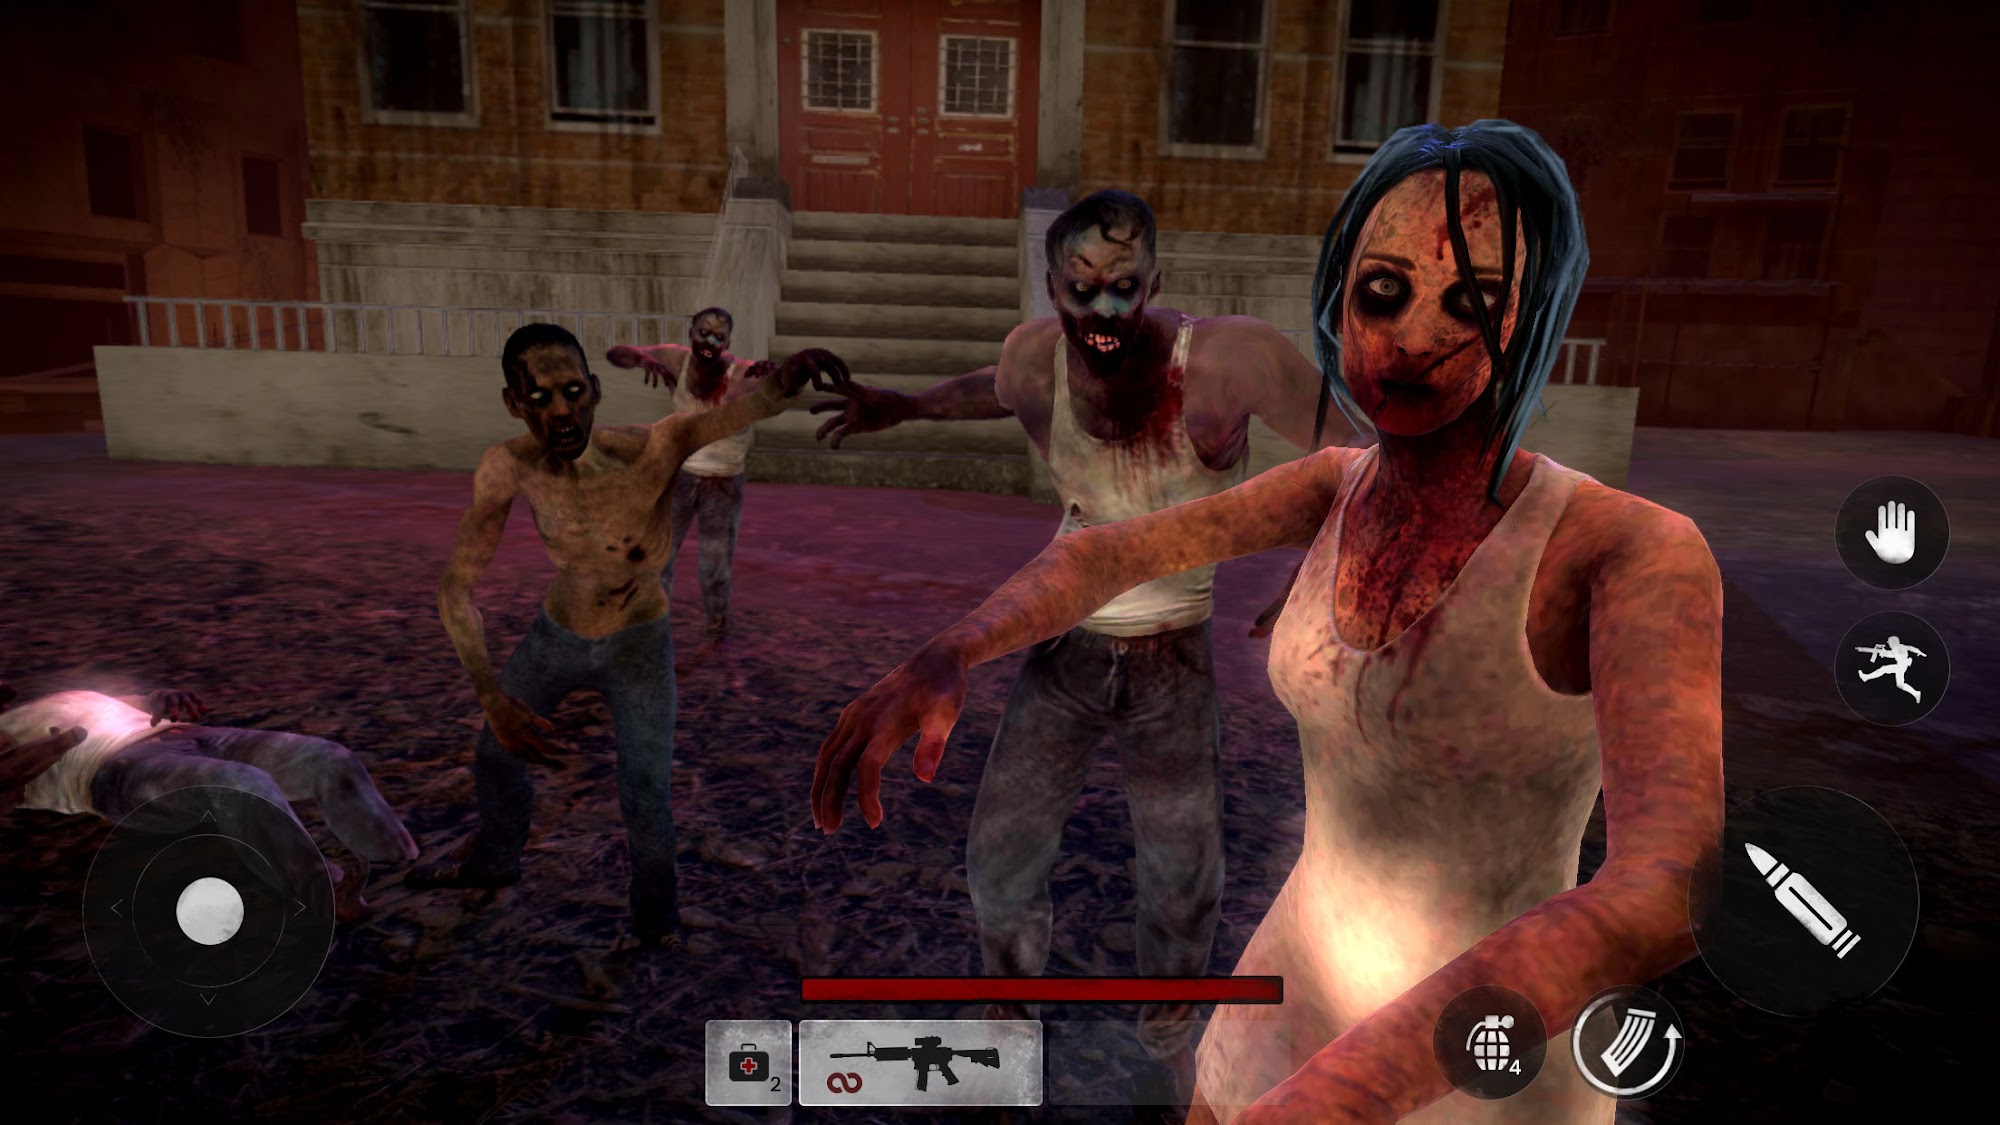 Scarica Warrior Zombie Shooter gratis per Android.